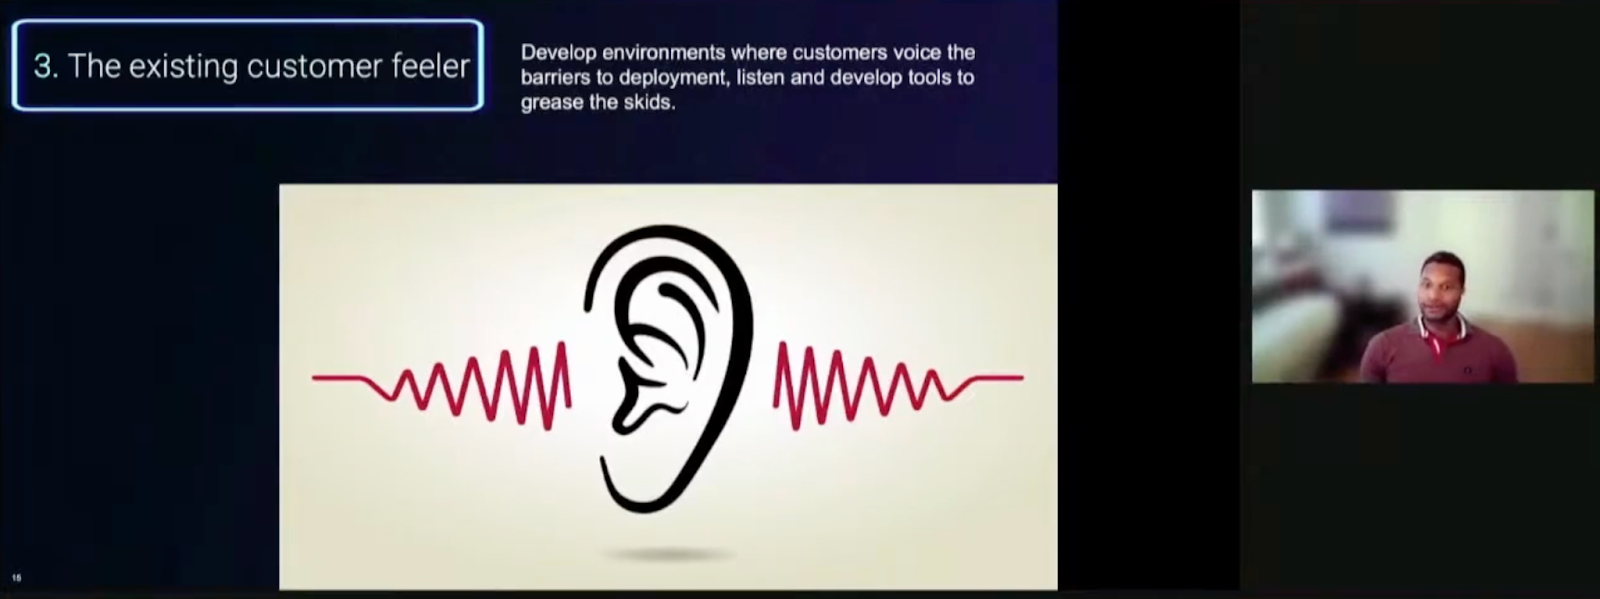 A presentation slide with an image of a cartoon ear and sound waves, and then the title and subheading: "3. Exisiting customer feeler: Develop environments where customers voice the barriers to deployment, listen and develop tools to grease the skids." 